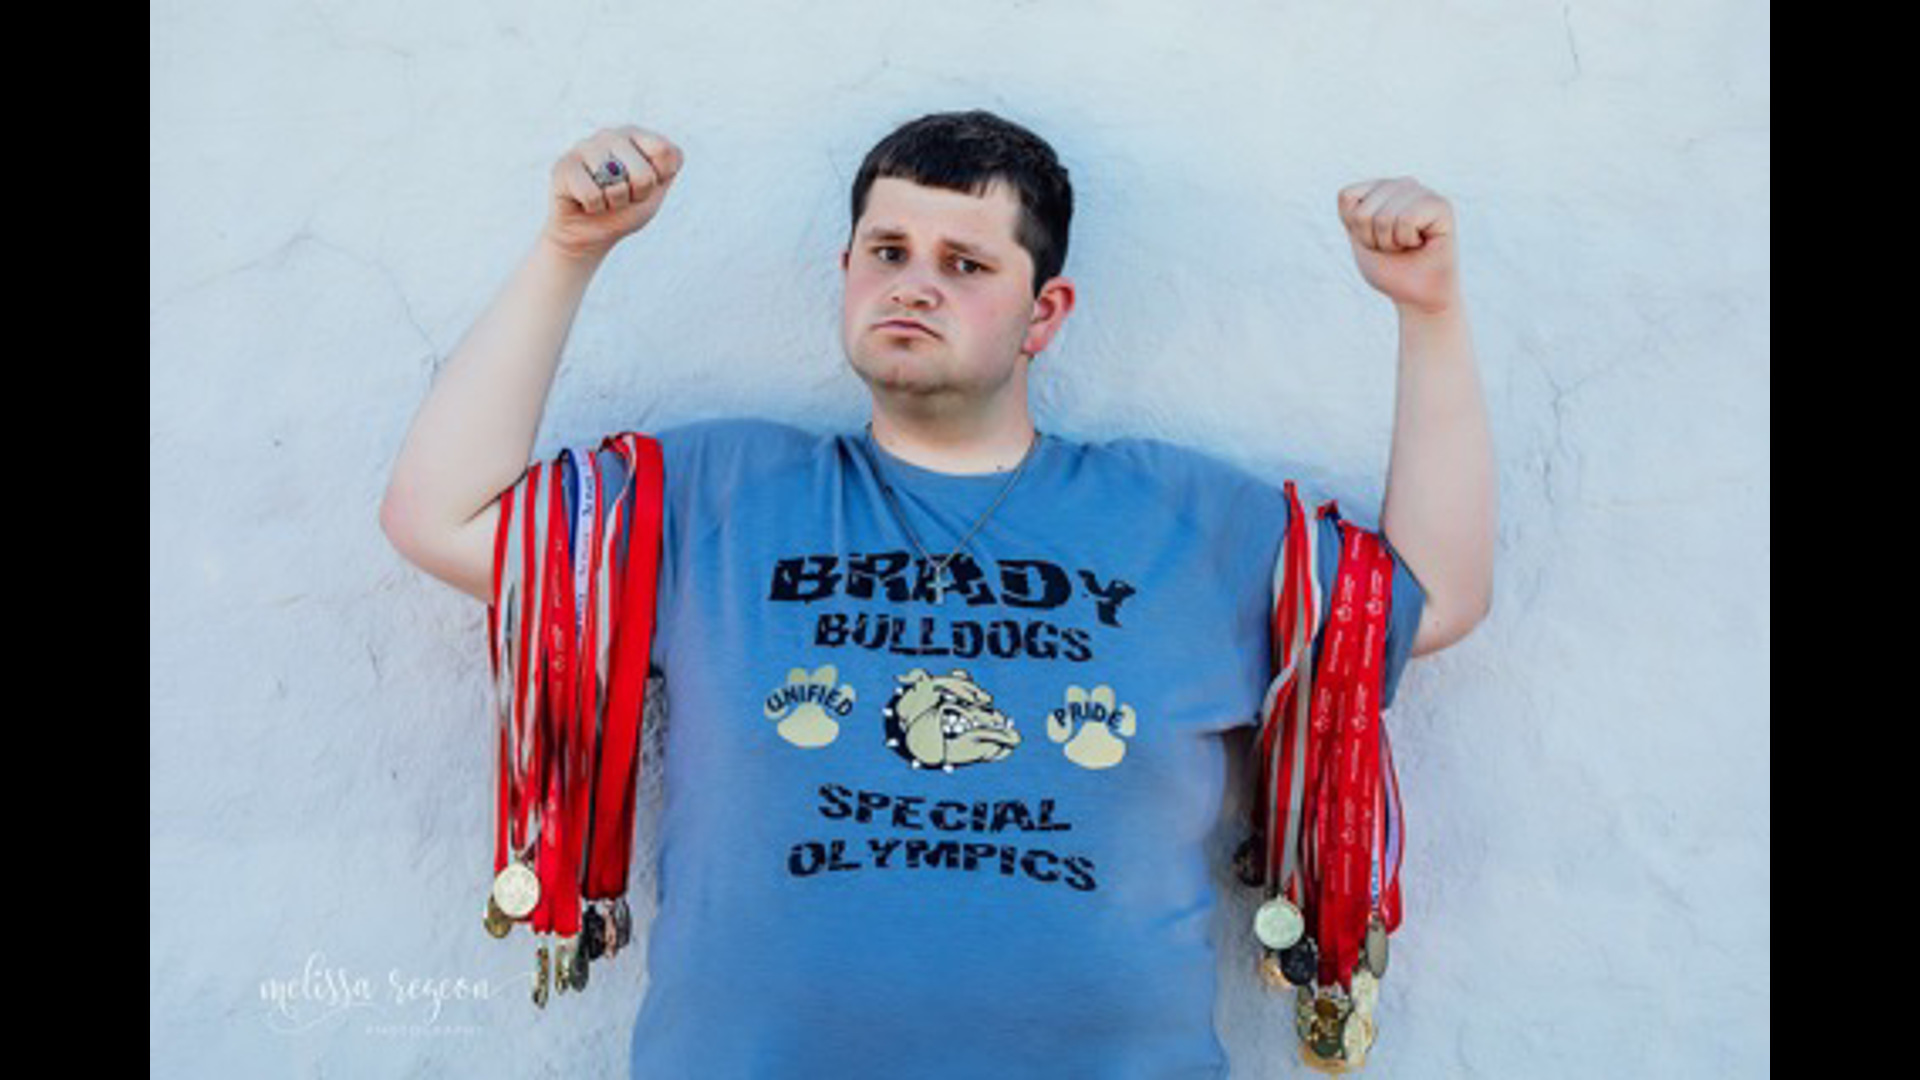 Will Mays has been competing on the Brady Special Olympics team since he was a freshmen. His personality is infectious for any one he meets. He'll soon be playing bocce ball in Canada.